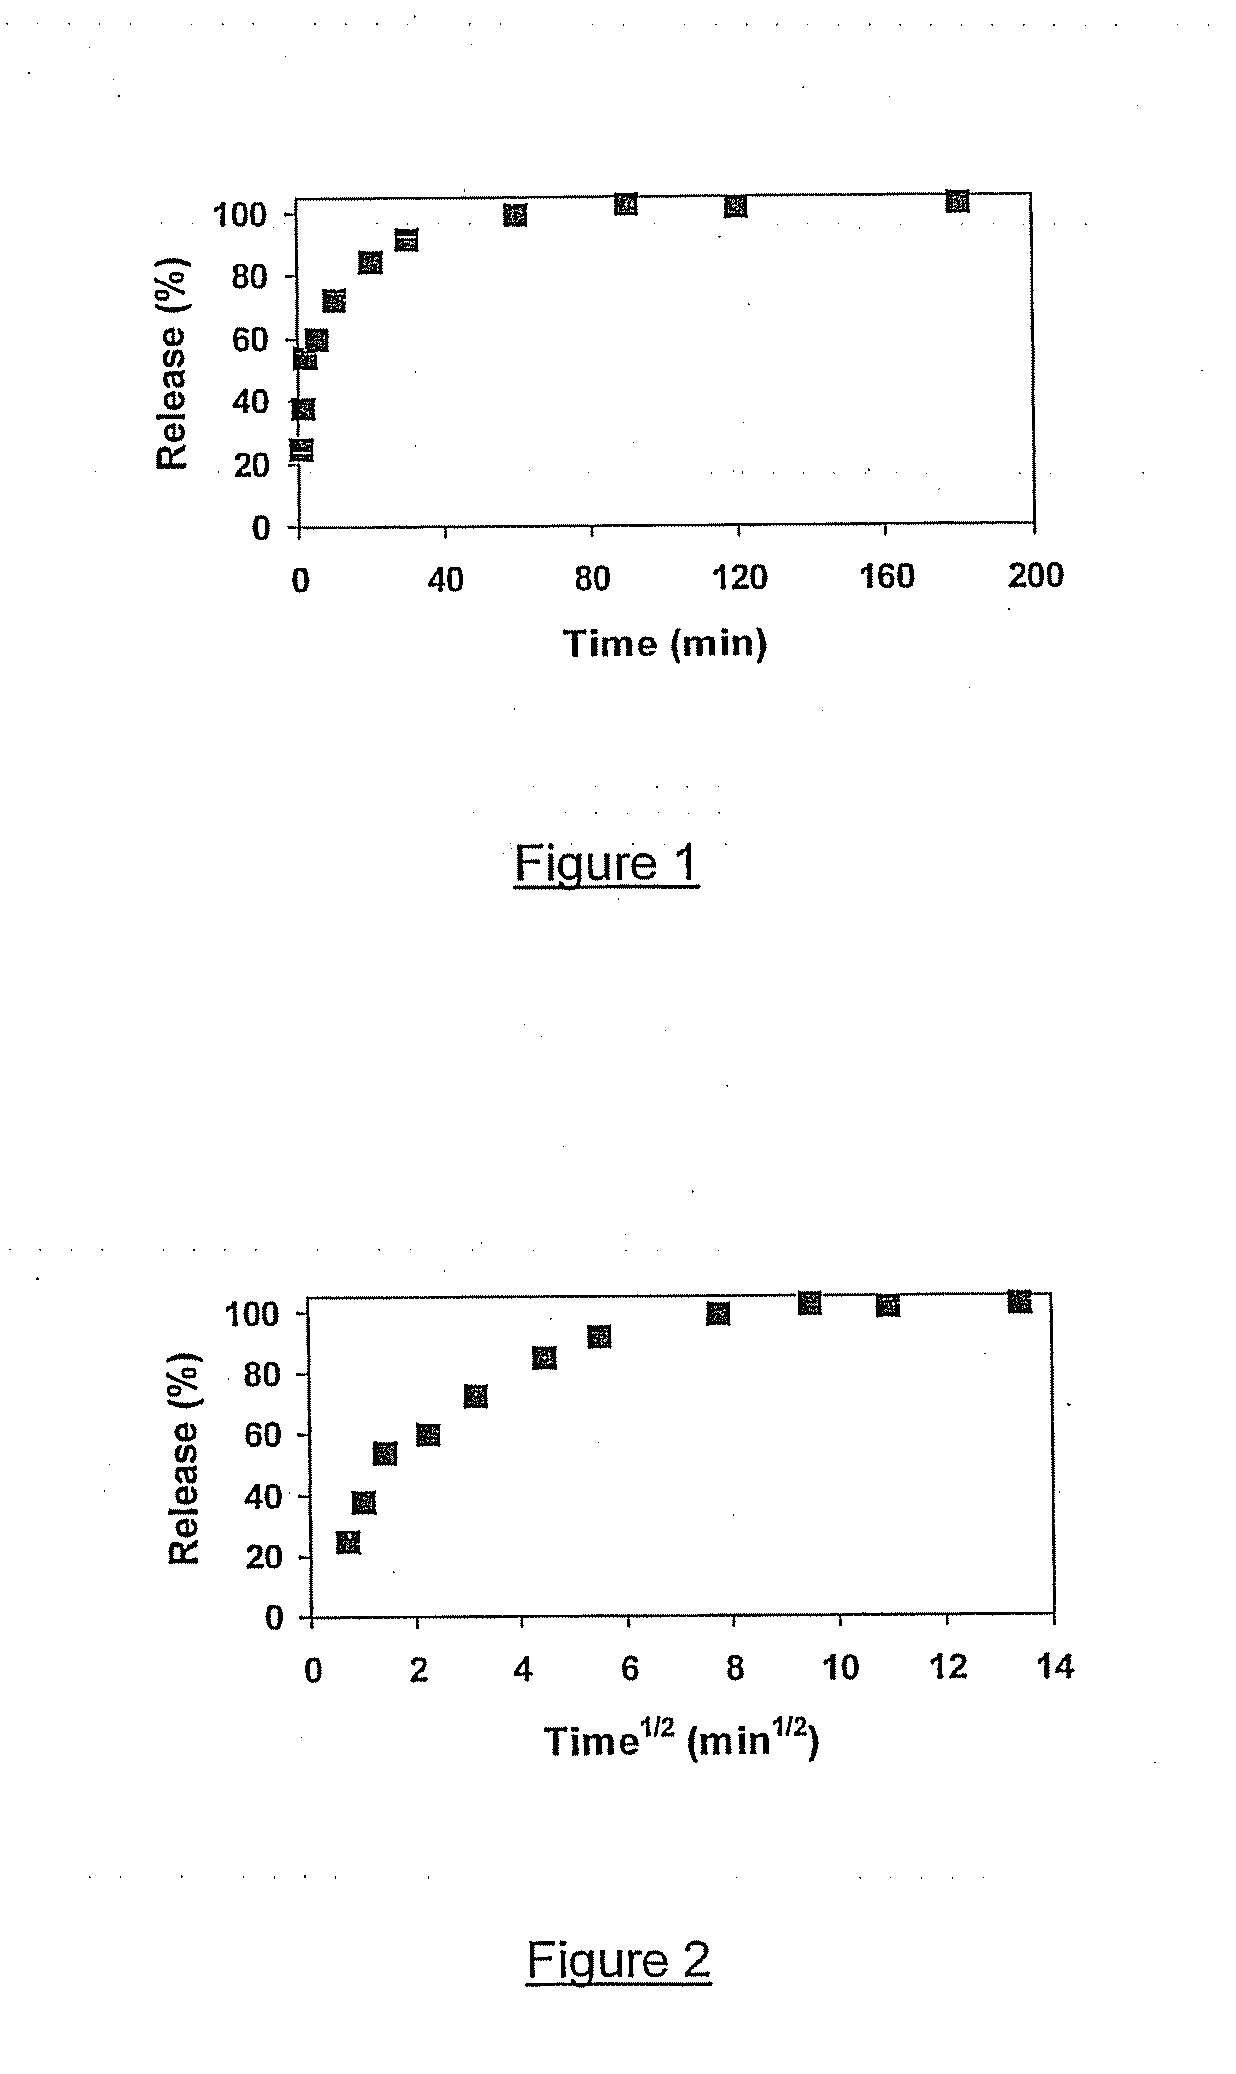 Controlled Release Delivery System for Bio-Active Agents